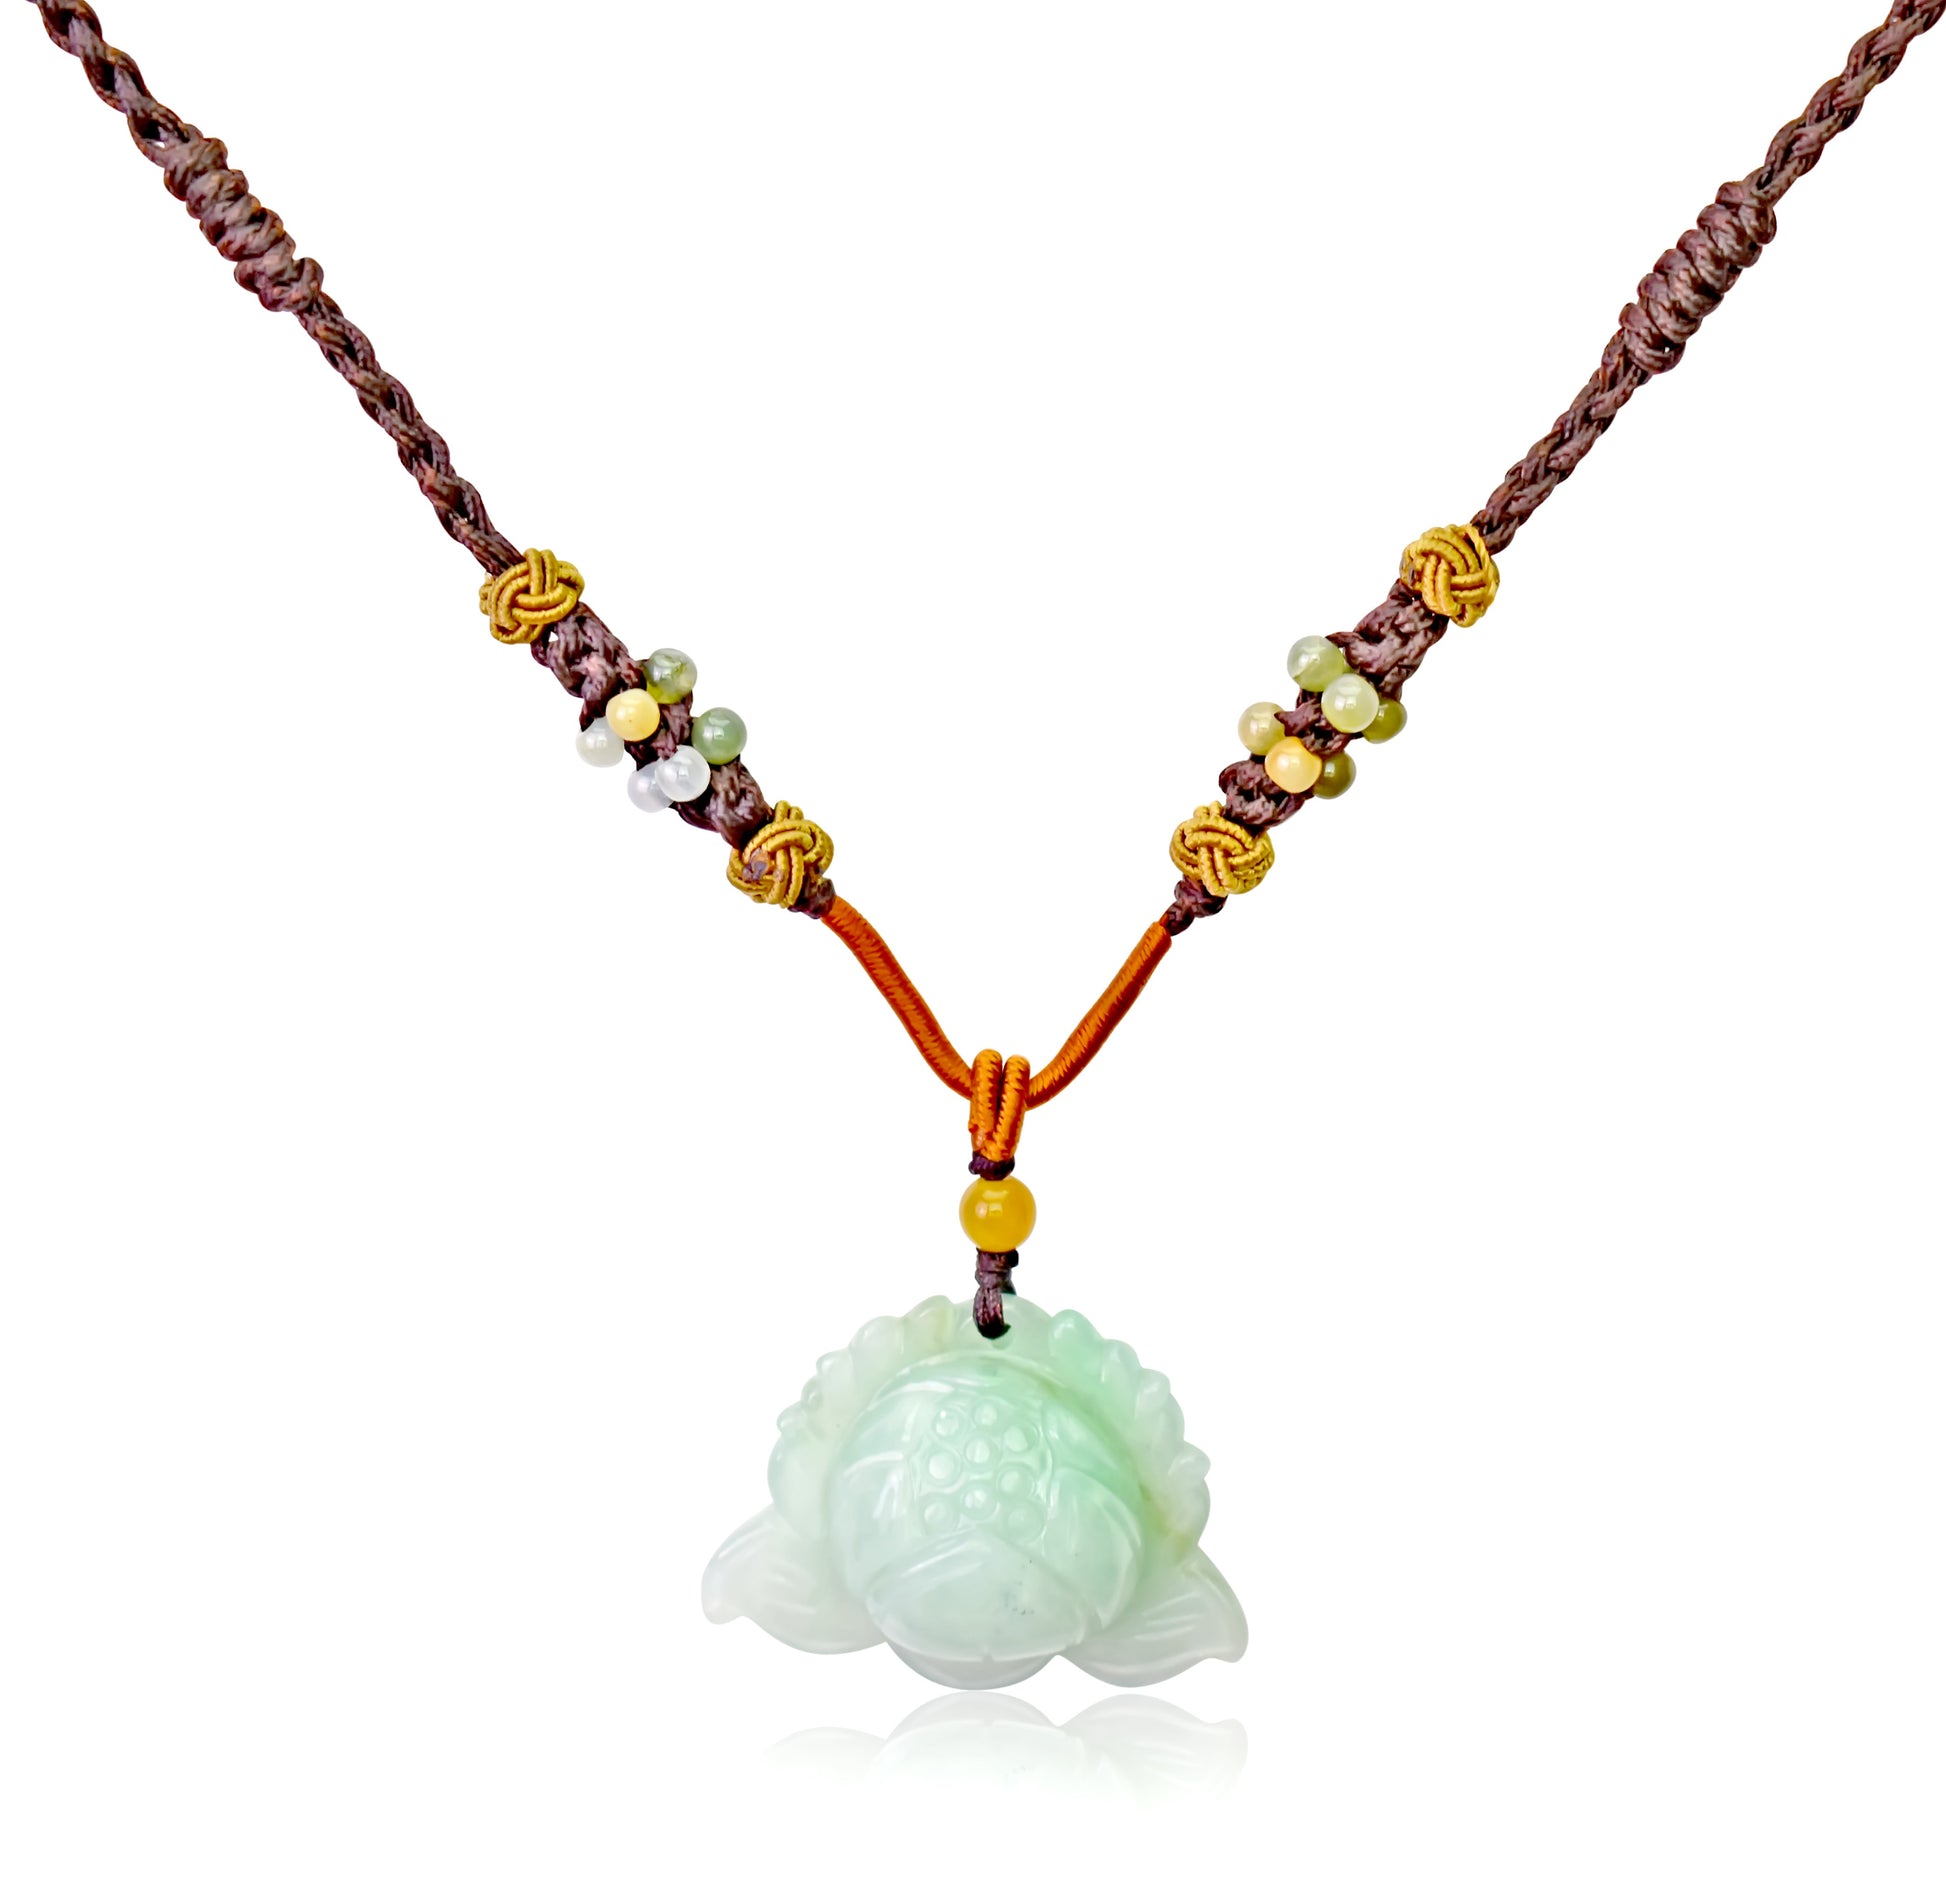 Purity in Your Life with Lotus Flower Jade Necklace made with Brown Cord